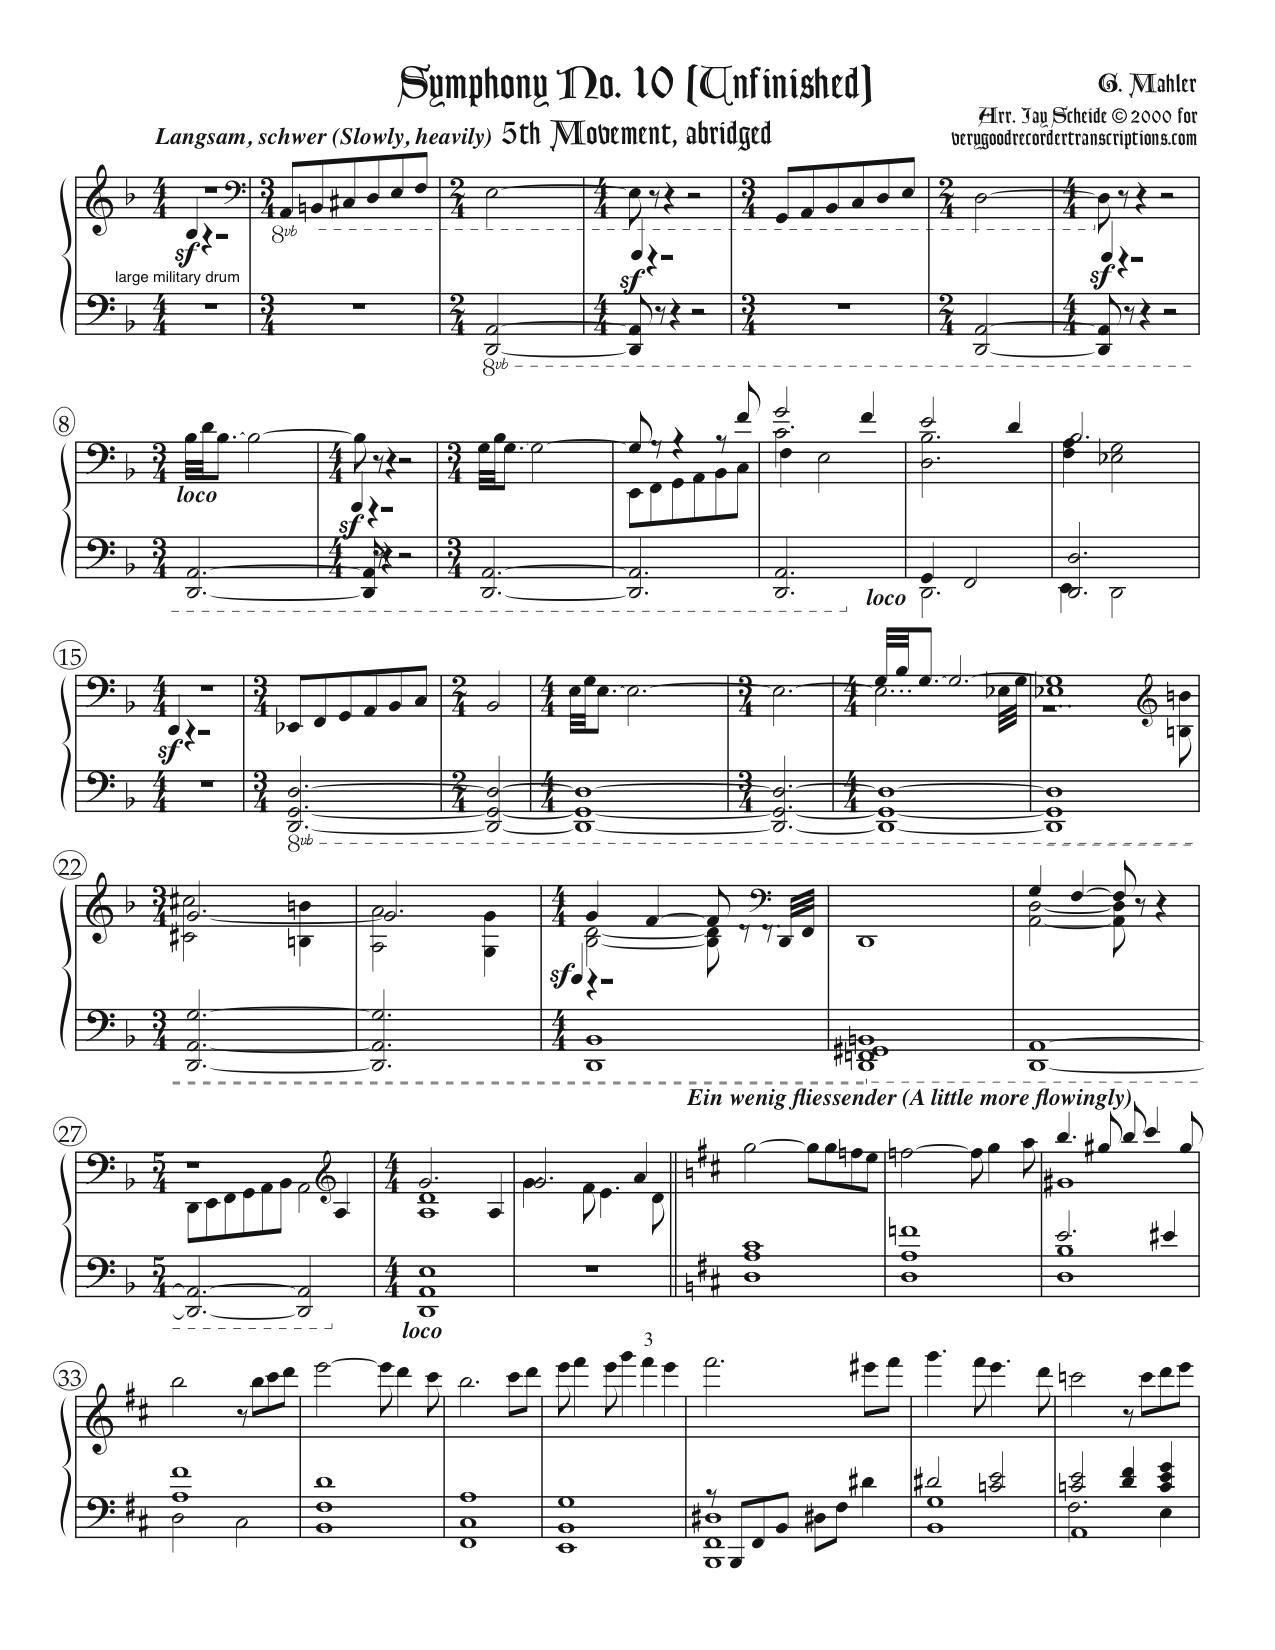 Fifth Movement from Symphony No. 10, abridged